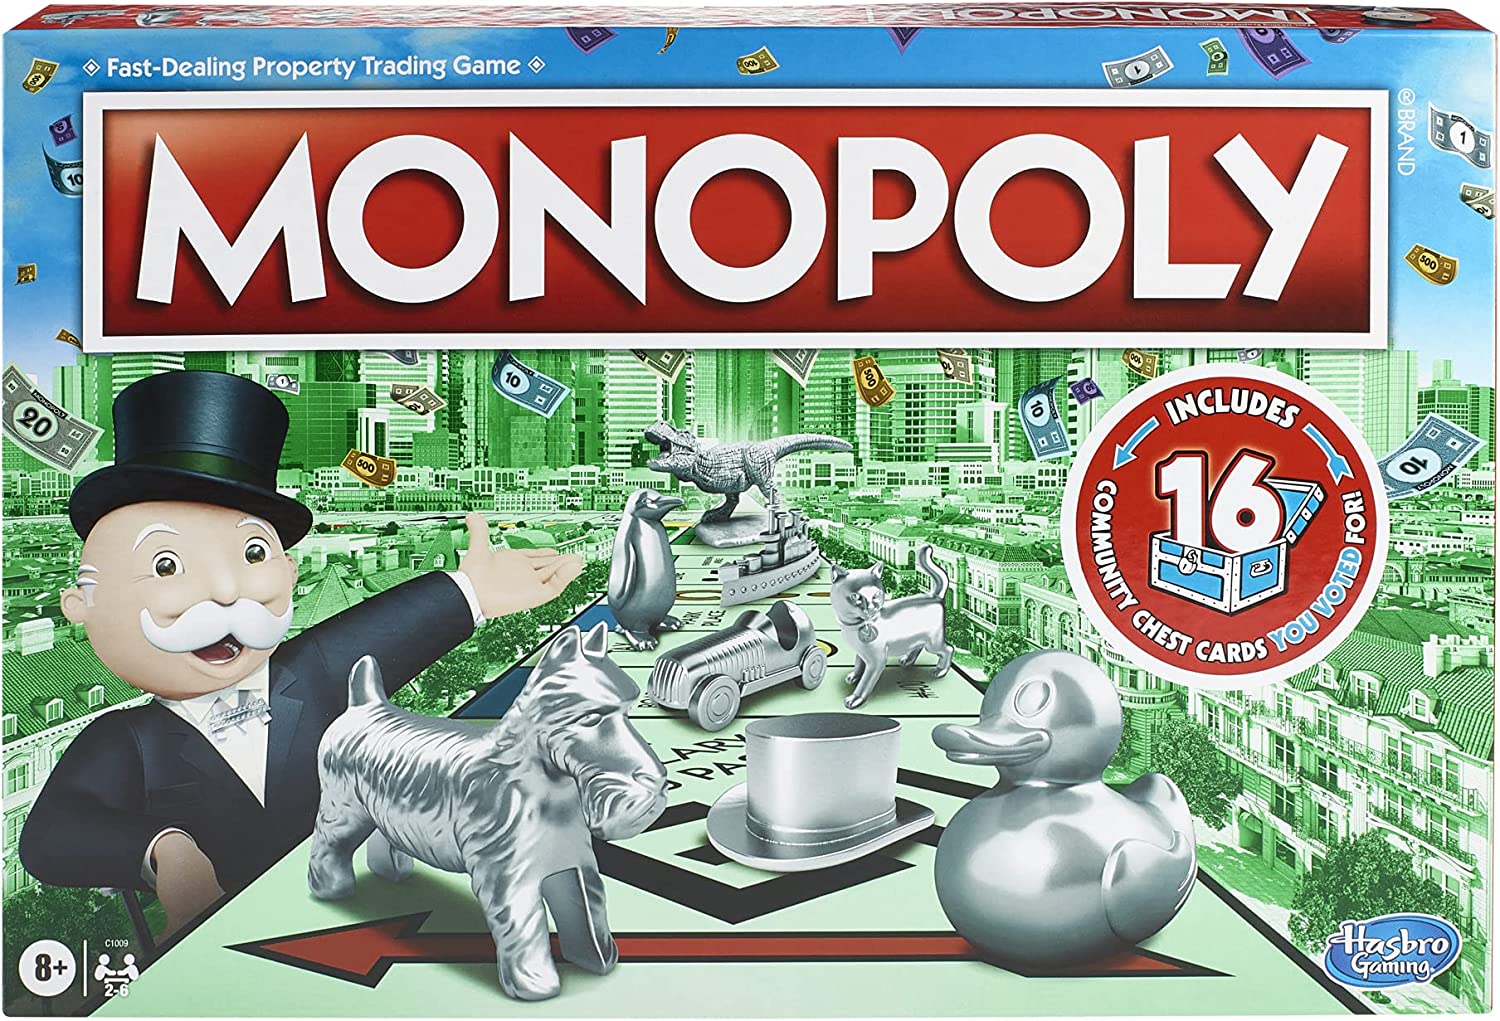 Monopoly Classic Family Board Game $10 + Free Shipping w/ Amazon Prime or Orders $25+